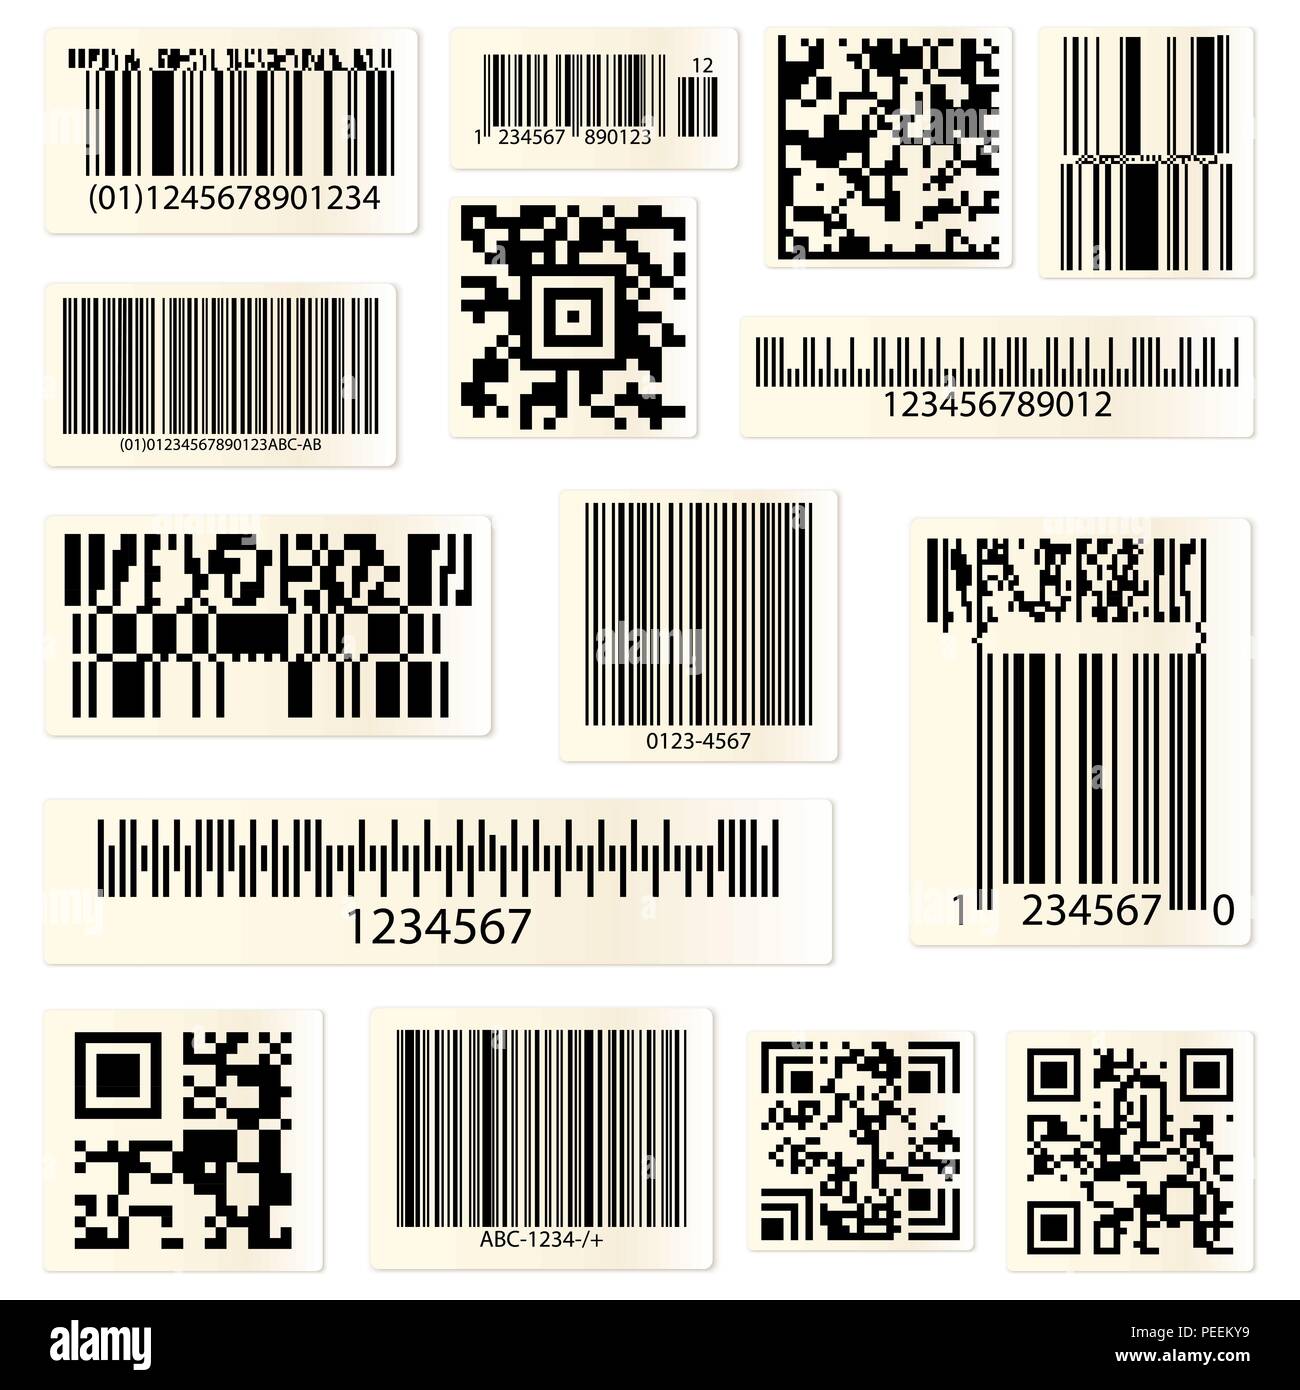 Set of isolated barcodes and QR codes for hyperlinks. Cellular phone or smartphone scanning technology for web or computer links. Identification square for product sale information, tag for coding Stock Vector